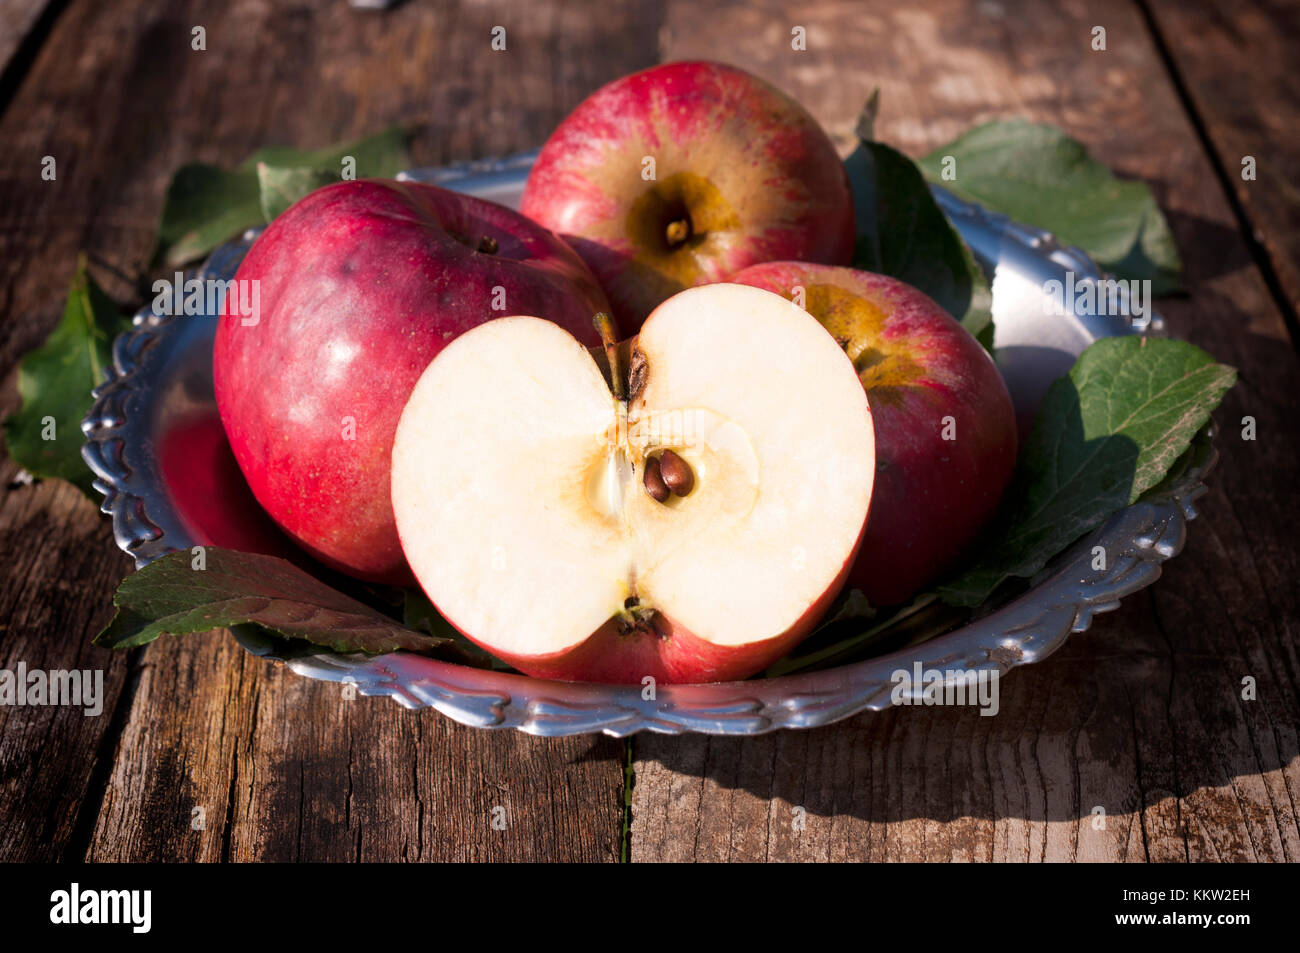 Real organic apples in metal plate.Selective focus on the front sliced apple Stock Photo